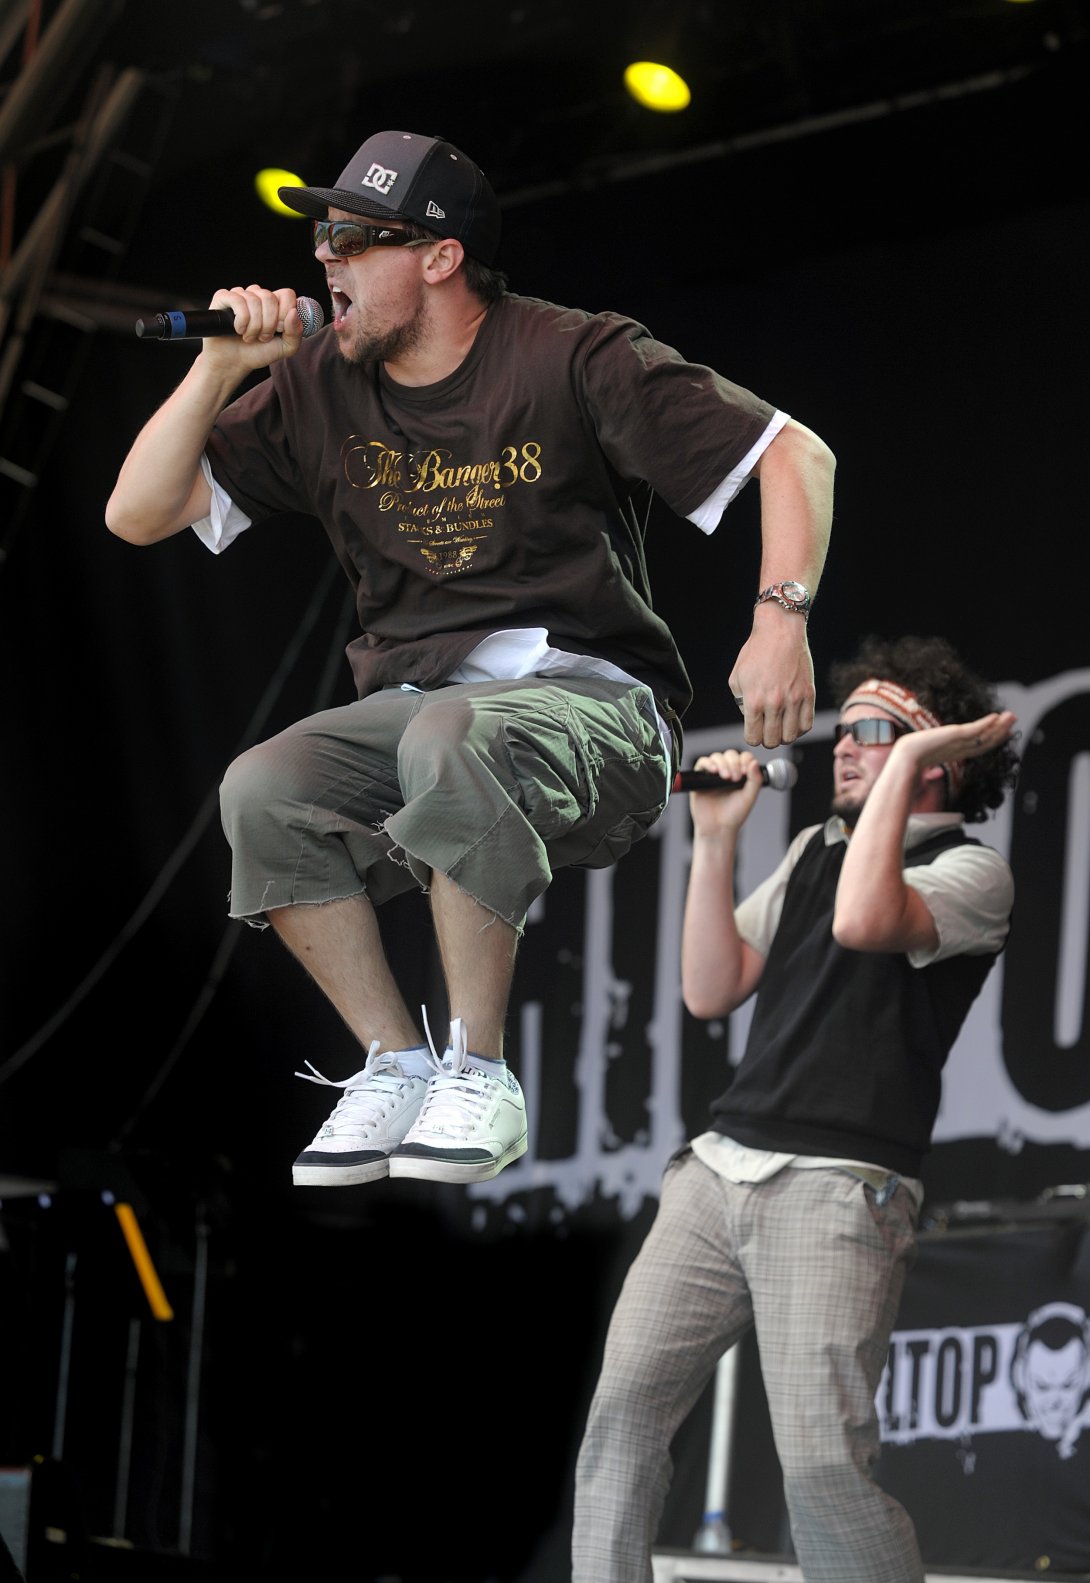 A man in shorts, tshirt, cap and sunglasses is depicted jumping in mid-air, singing into a microphone. Another musician stands behind him.